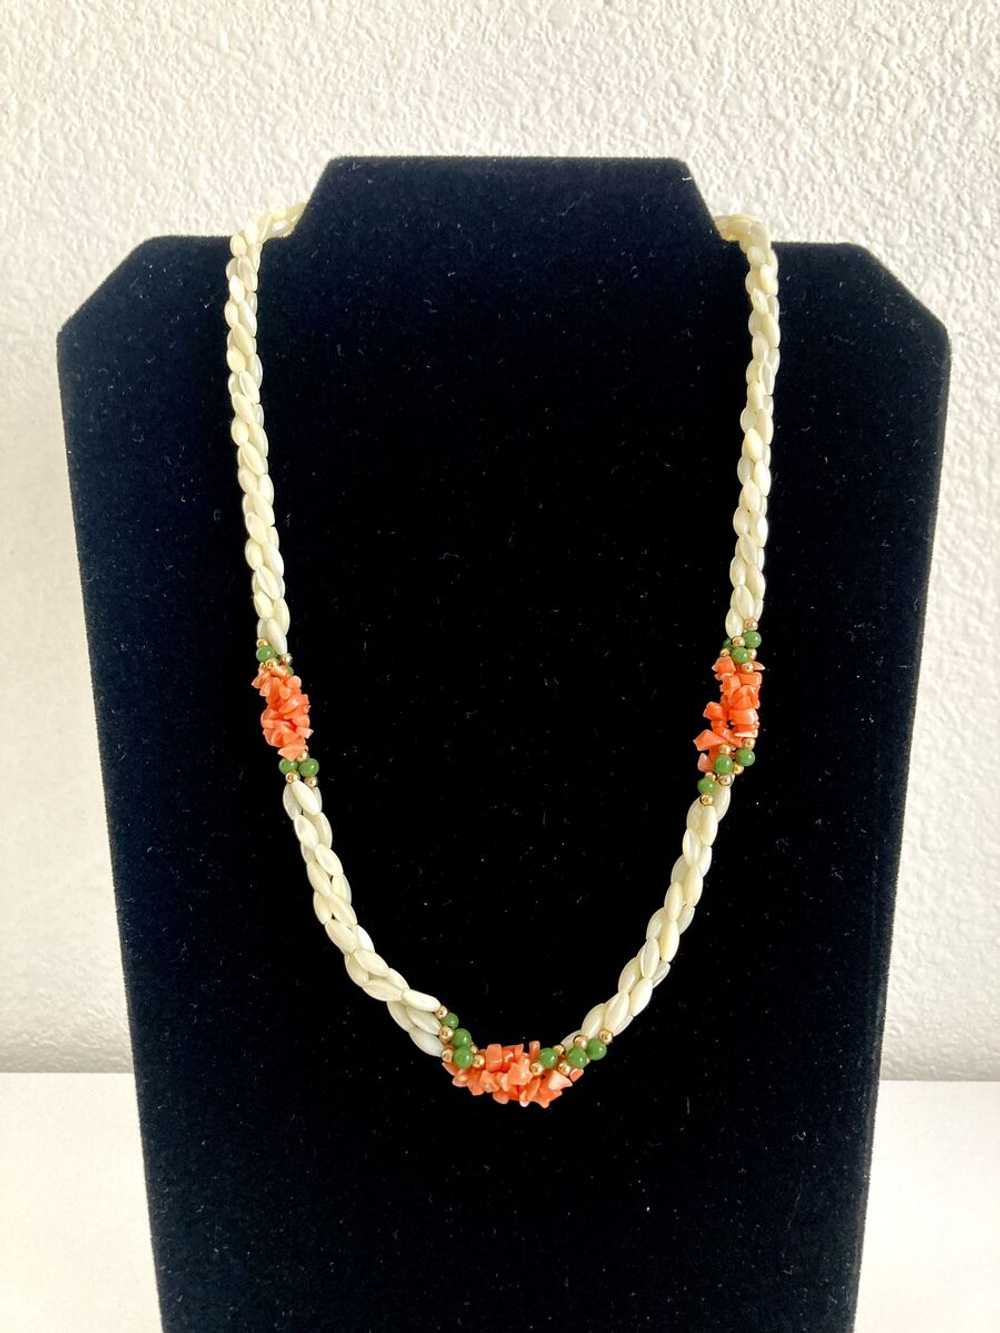 Mother of Pearl, Coral, & Jade Necklace - image 2